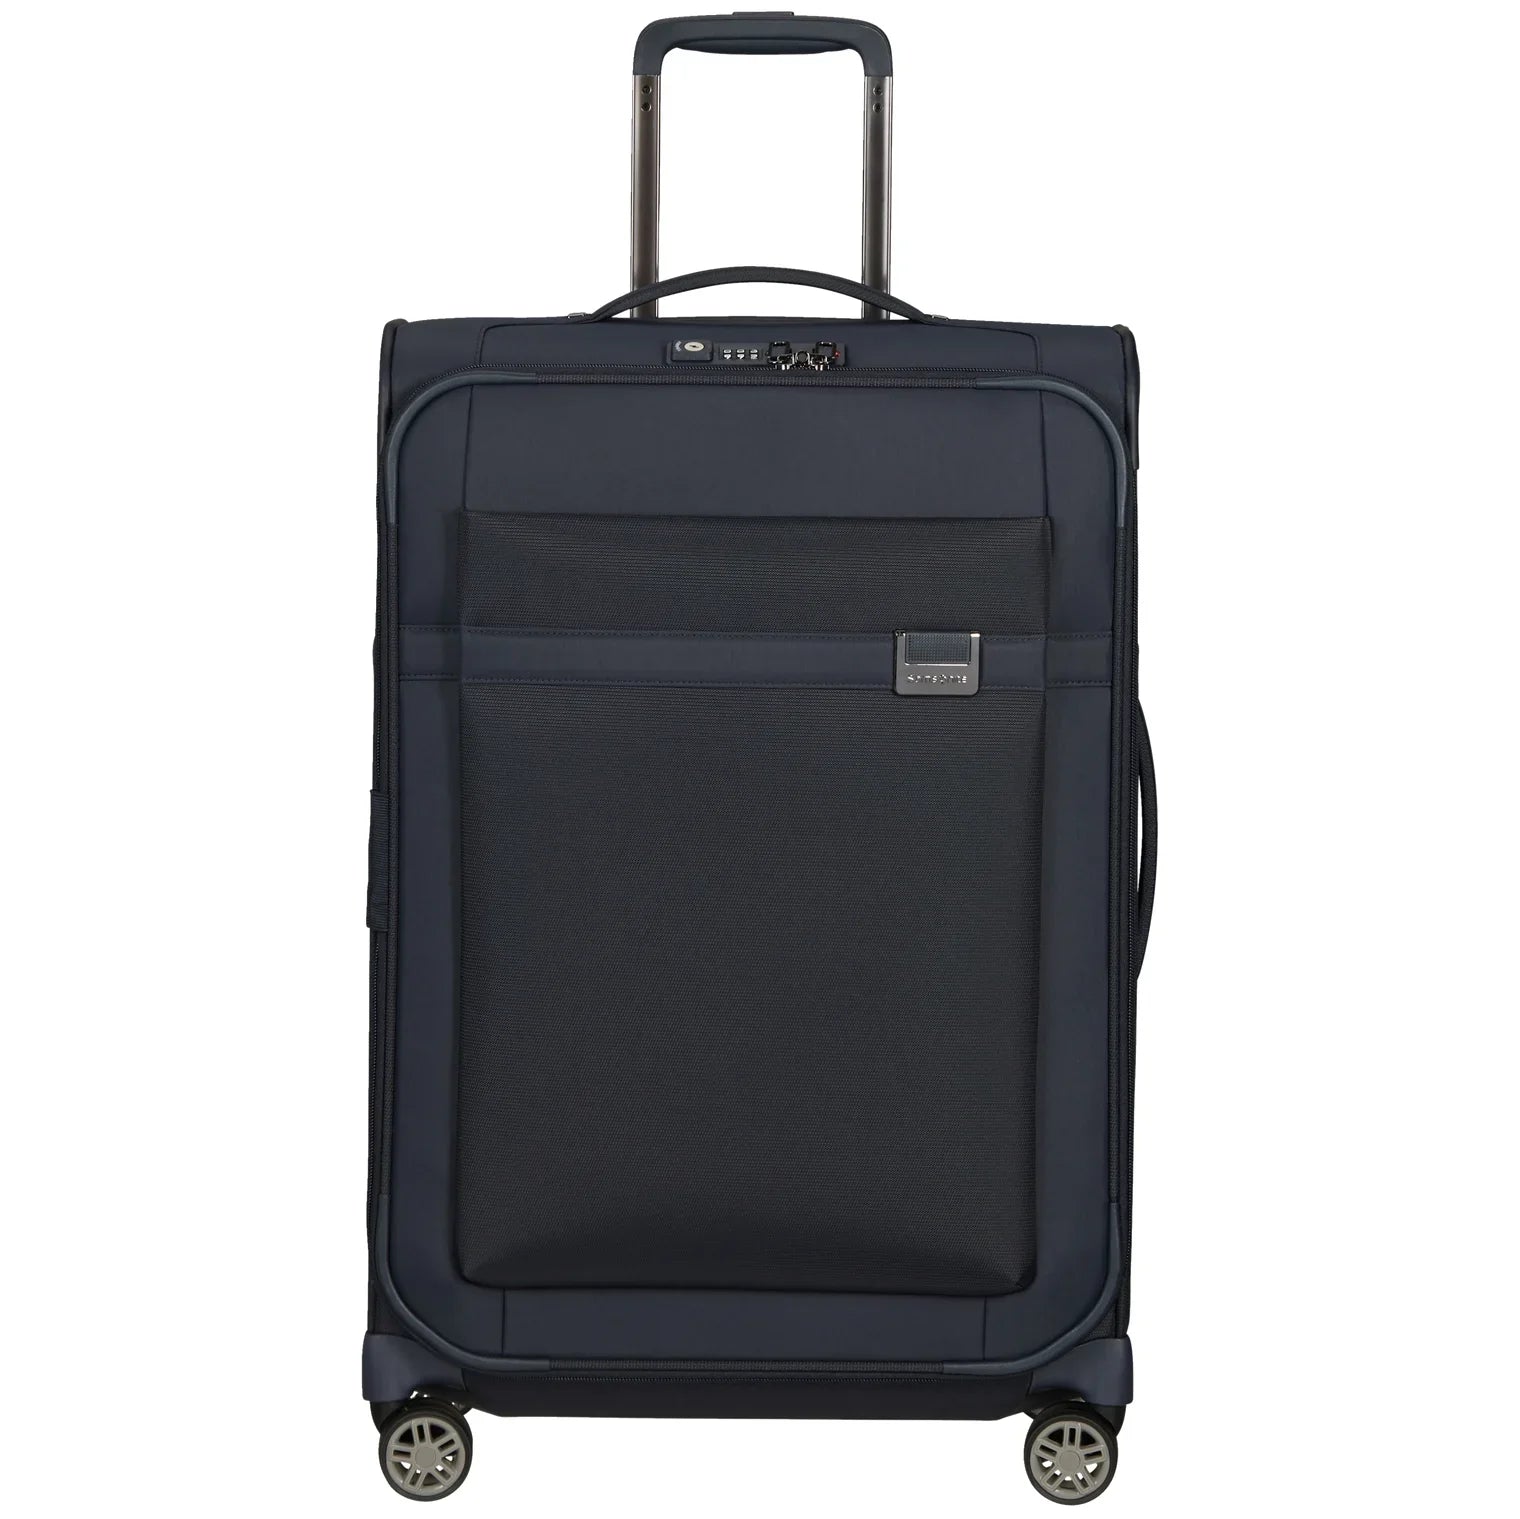 The perfect solution for 2 – from all trolleys requirements Page Samsonite 